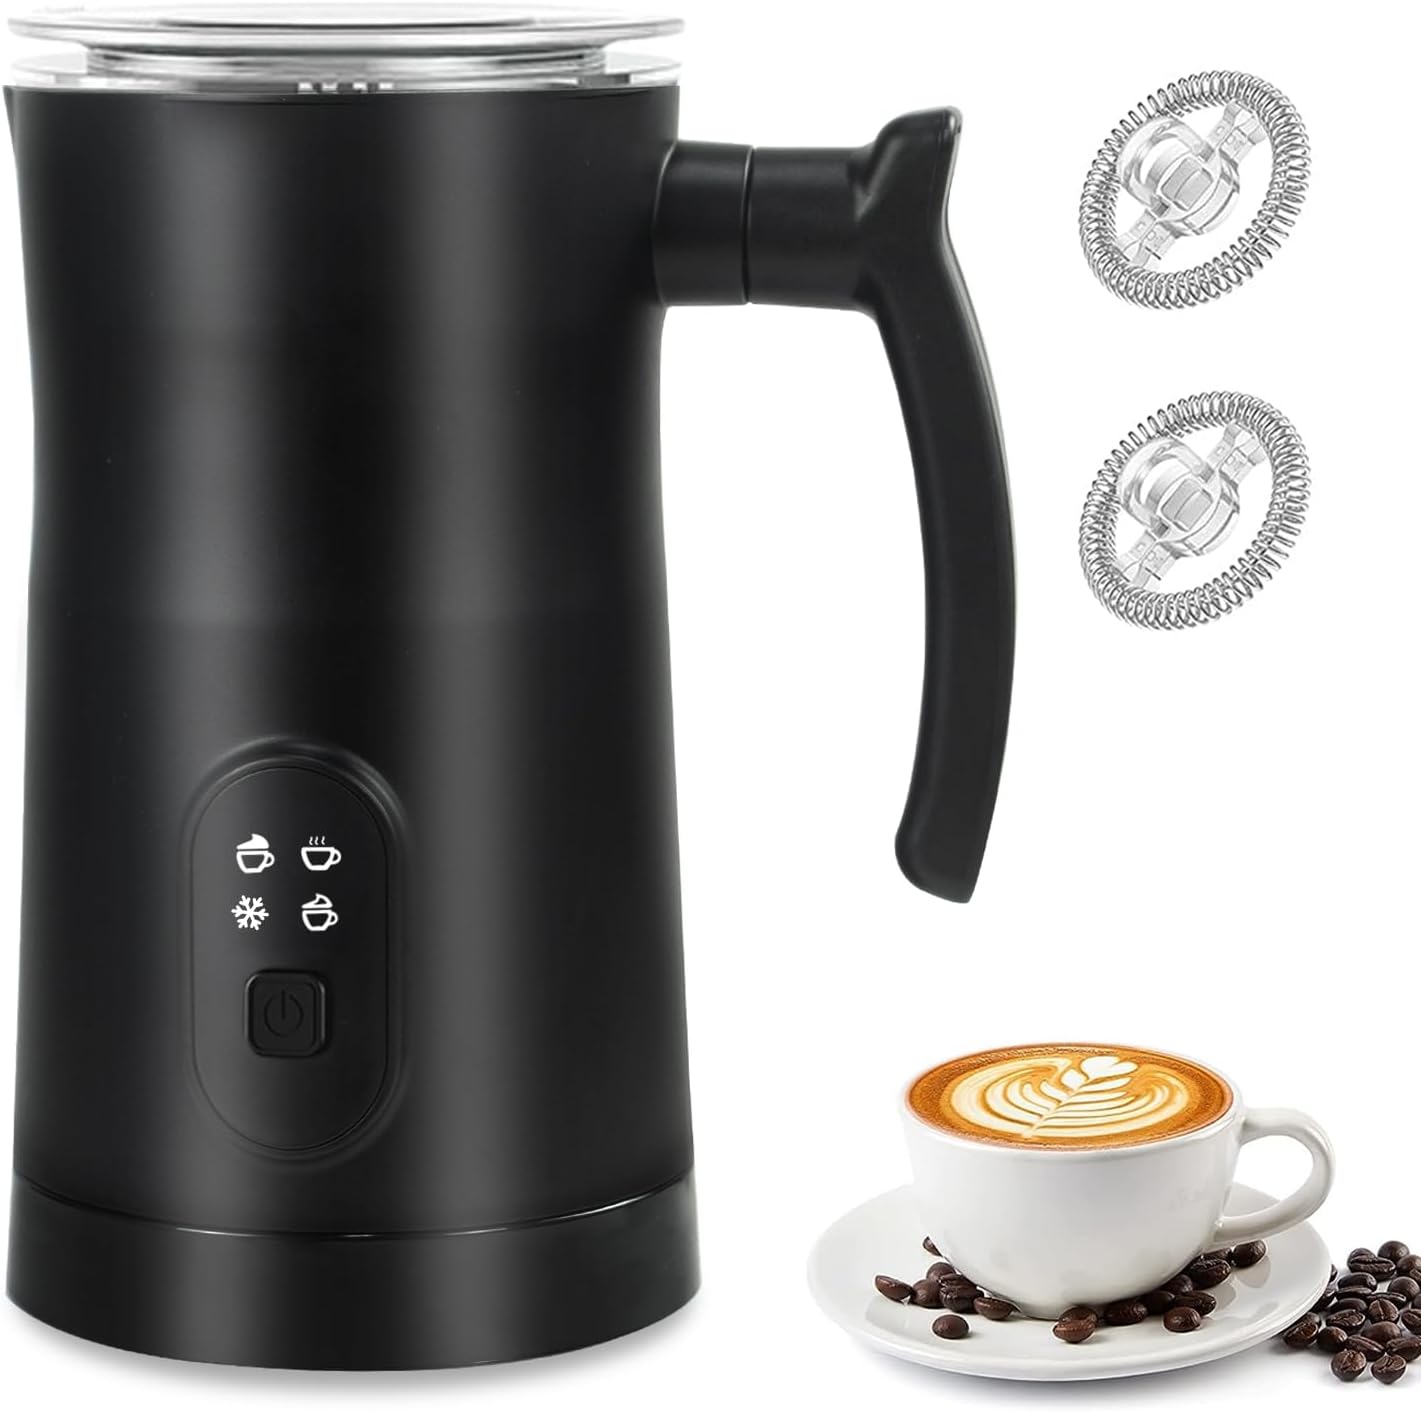 Milk Frother, 4 in 1 Electric Milk Frother and Steamer with Handle, Saicefe 11.8oz/350ml Automatic Warm and Cold Foam Maker for Coffee,Latte, Cappuccino, Hot Chocolate, 400W, Black